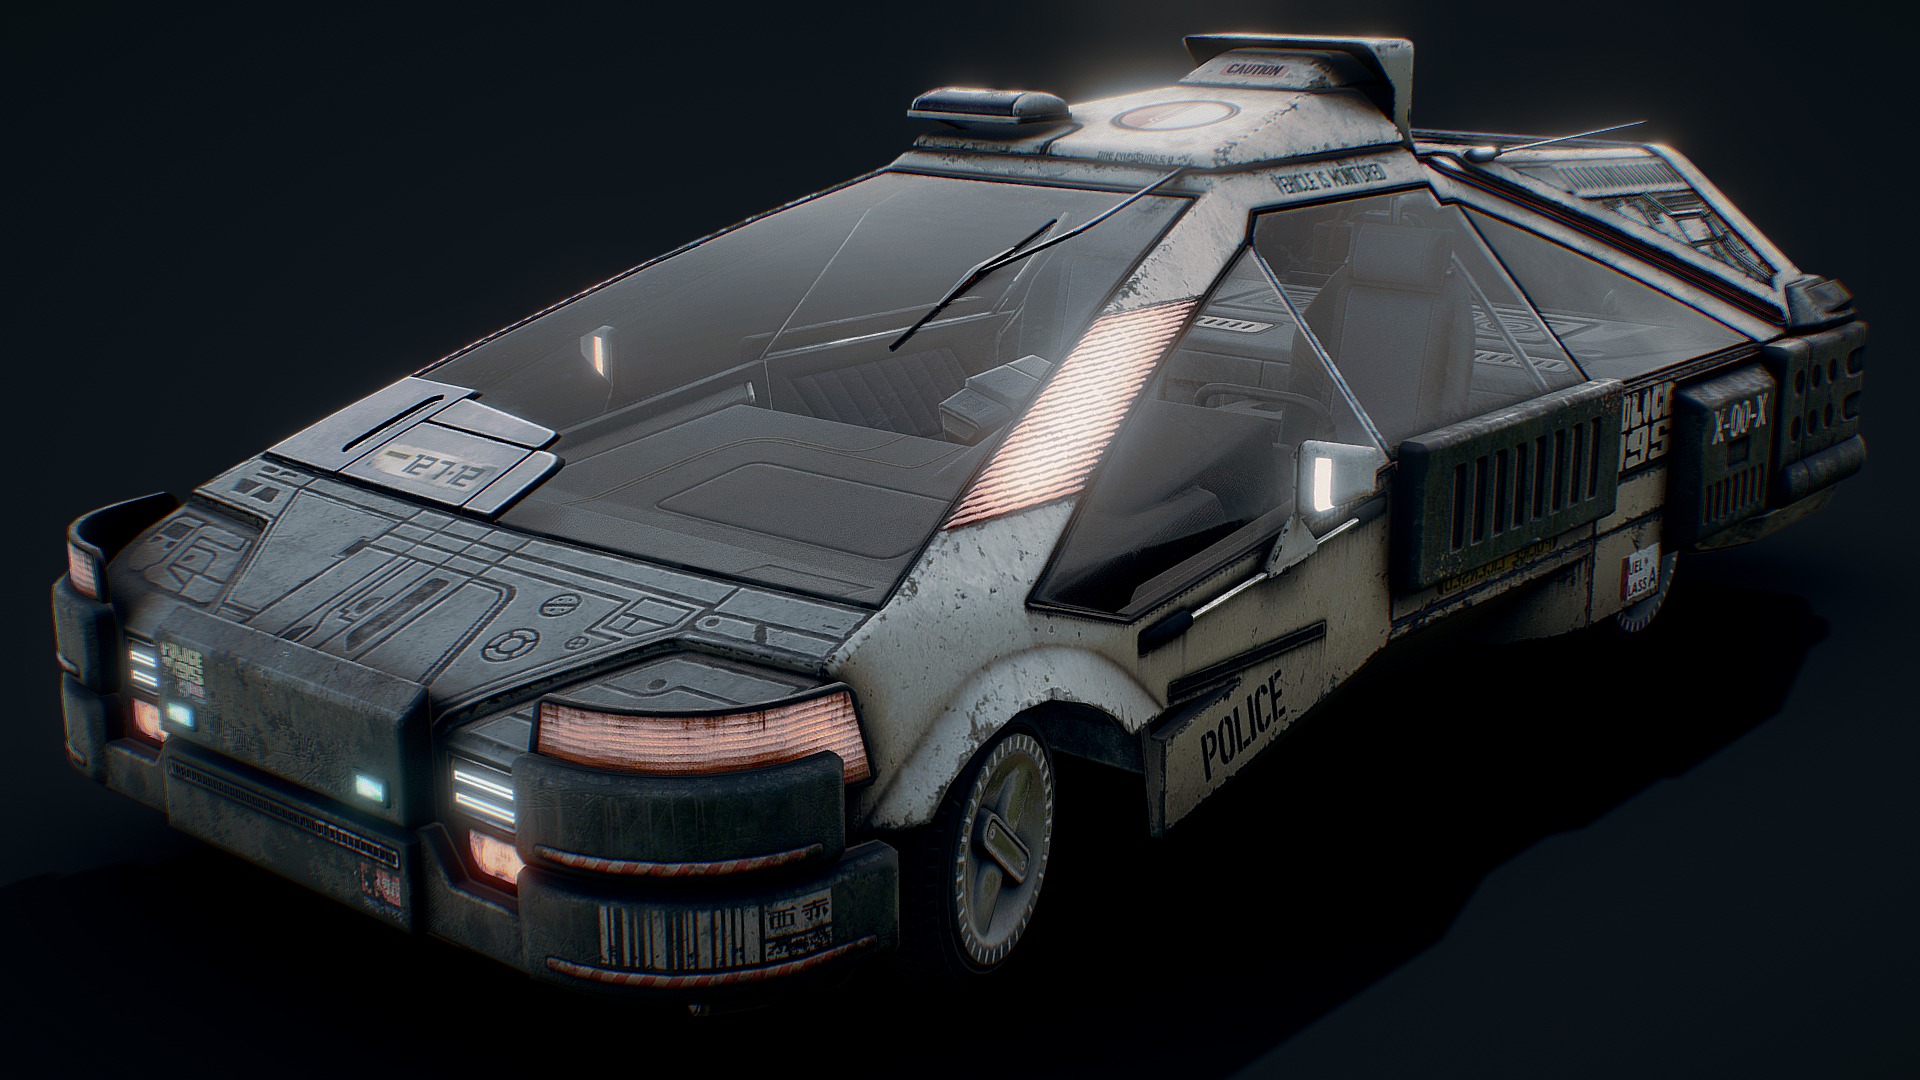 3D model 2019 Blade Runner Ground Police Car - This is a 3D model of the 2019 Blade Runner Ground Police Car. The 3D model is about a silver and black car.